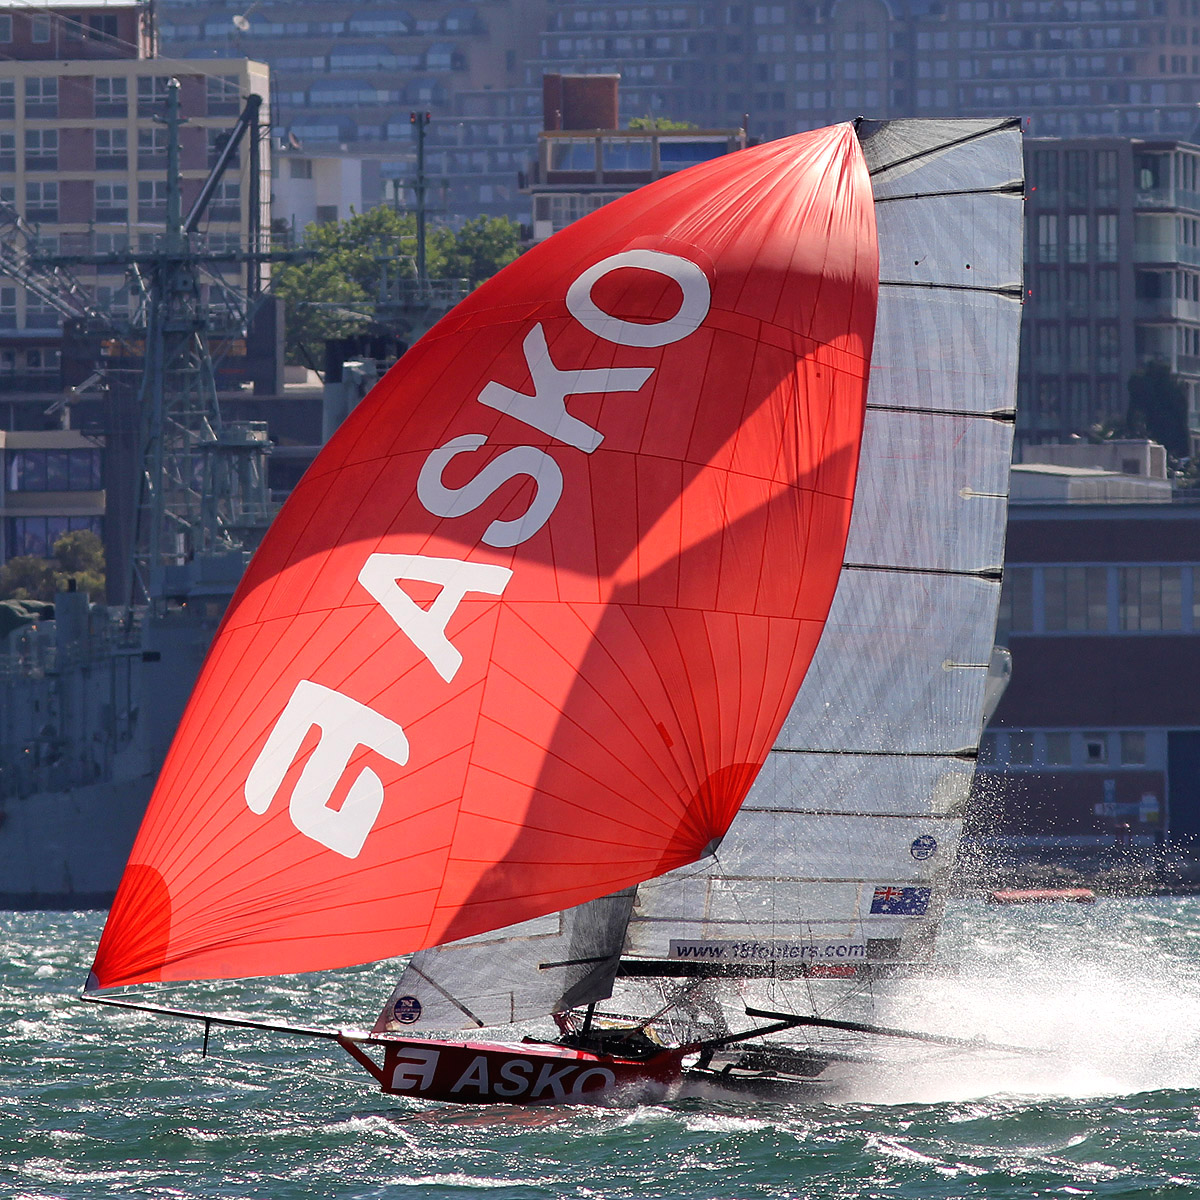 asko-appliances-races-towards-the-finish-line-to-grab-second-place